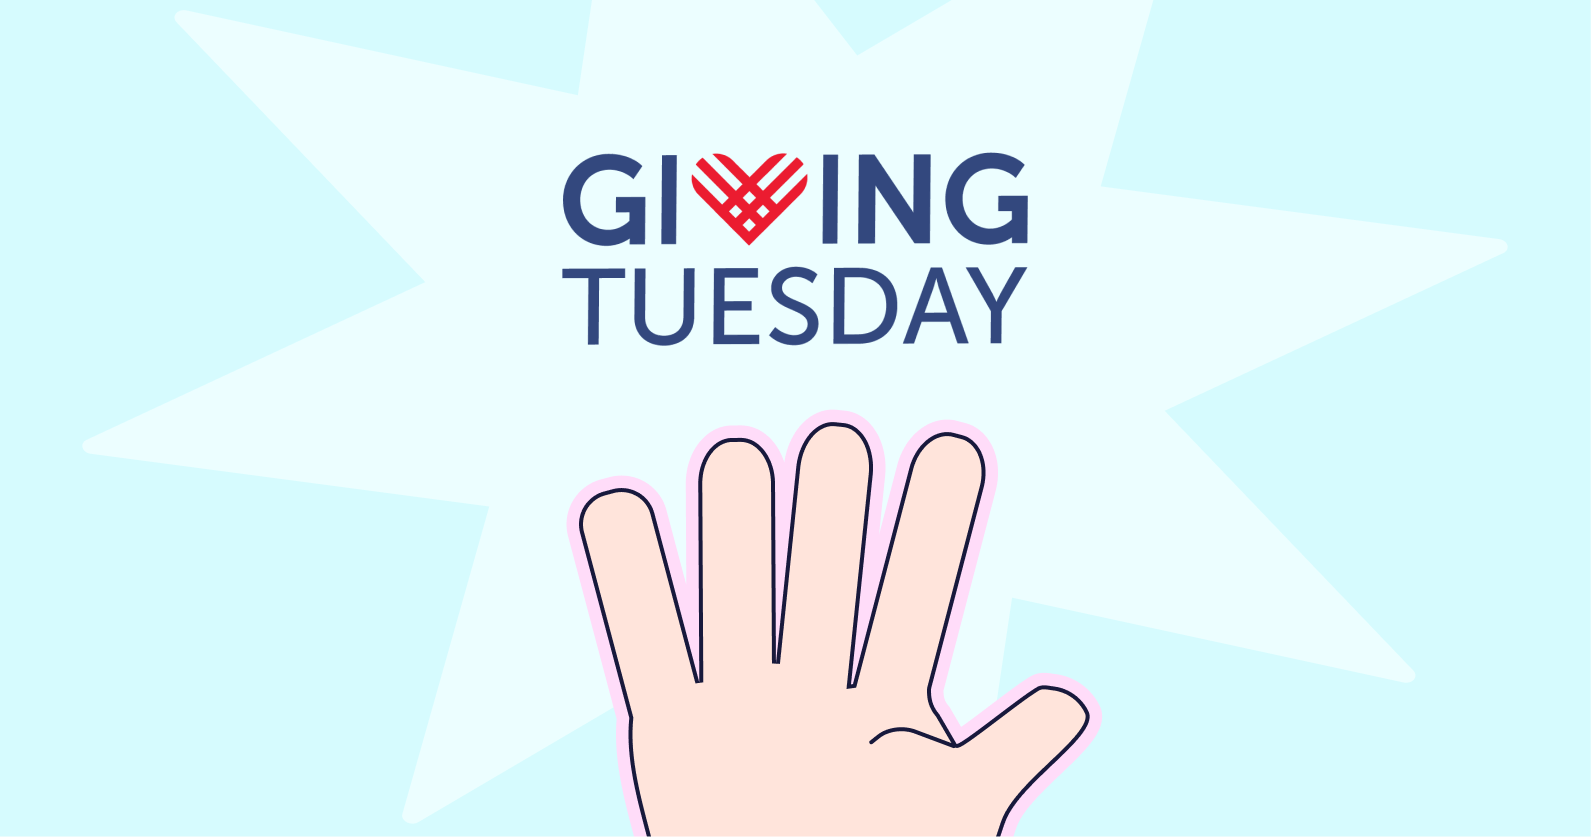 Illustration of a hand and the GivingTuesday logo.